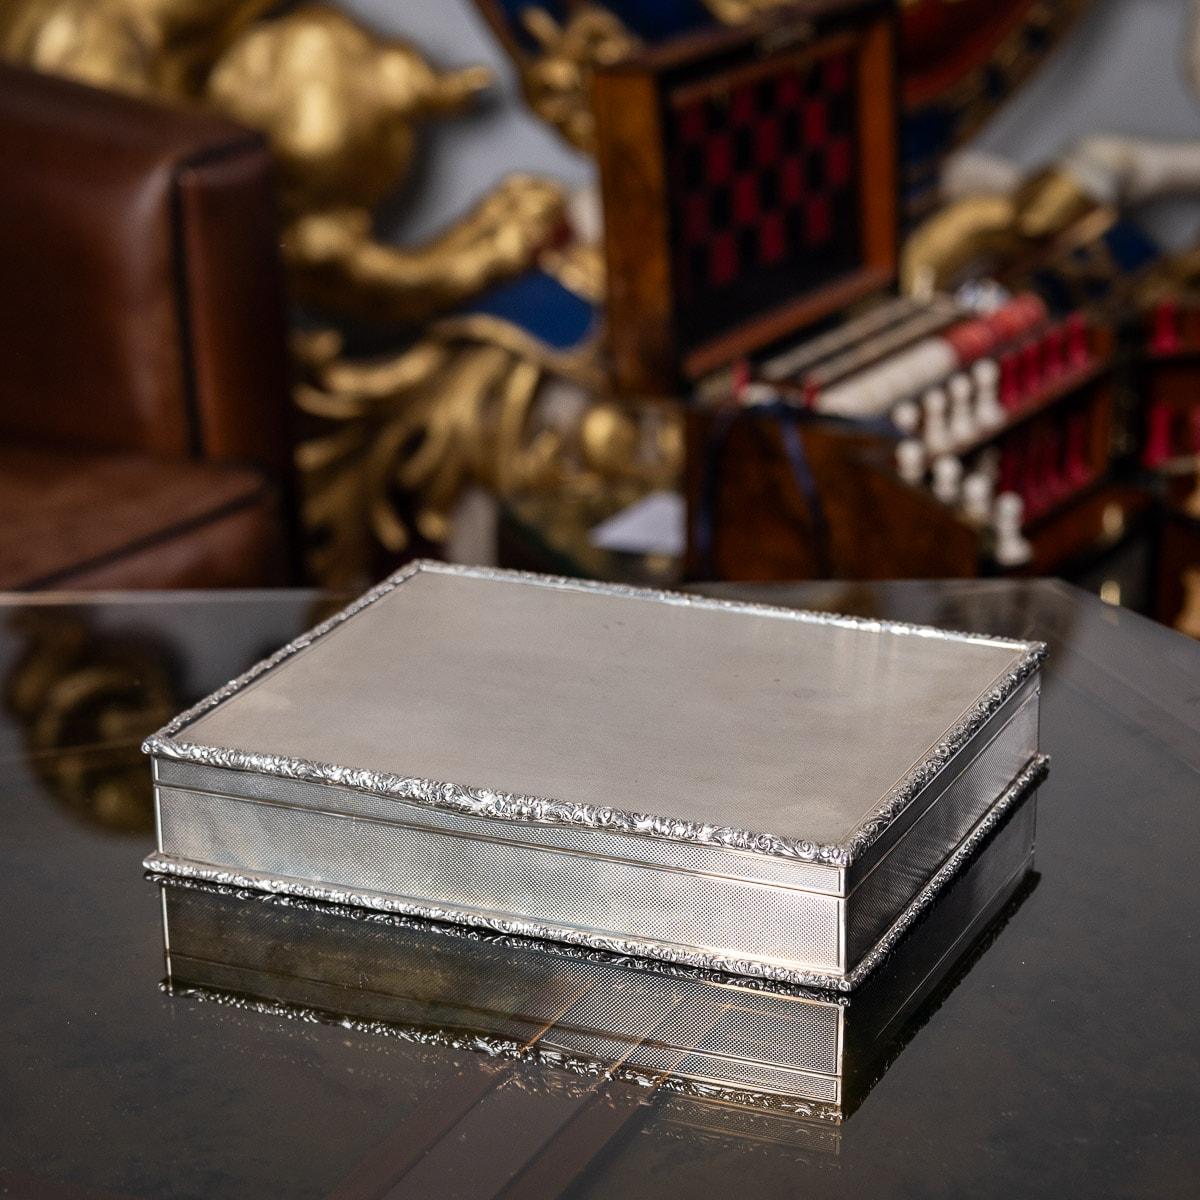 Elegant mid-20th century solid silver cigar box, beautiful and very stylish engine-turned design, applied with a cast scroll boarders, inside richly gilt and wooden lining, the base is lined with black leather. Hallmarked English silver (925